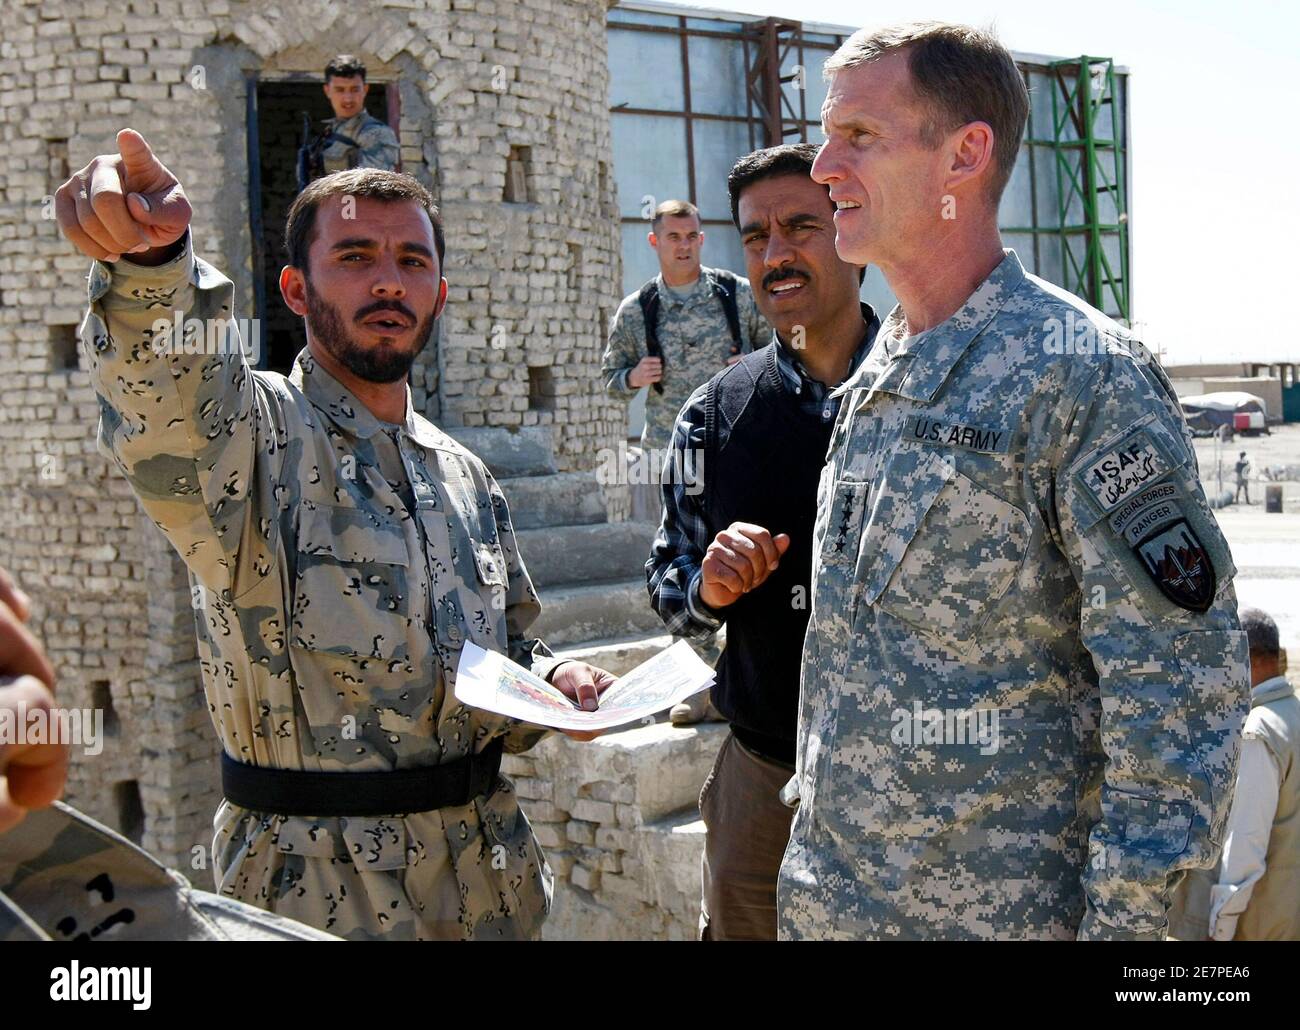 General Stanley McChrystal (R), commander of U.S. and NATO forces in Afghanistan, receives a briefing from Afghan border police commander Colonel Abdul Razziq during a visit to the Afghan border with Pakistan, near Spin Boldak in Kandahar Province, southern Afghanistan, in this March 4, 2010 file photo. One of the most important trade routes in Asia was closed last week while a boyish-looking man everyone calls 'the general' showed around the commander of U.S. and NATO forces in Afghanistan. Picture taken March 4, 2010.   To match feature AFGHANISTAN-BORDER/     REUTERS/Peter Graff  (AFGHANIST Stock Photo